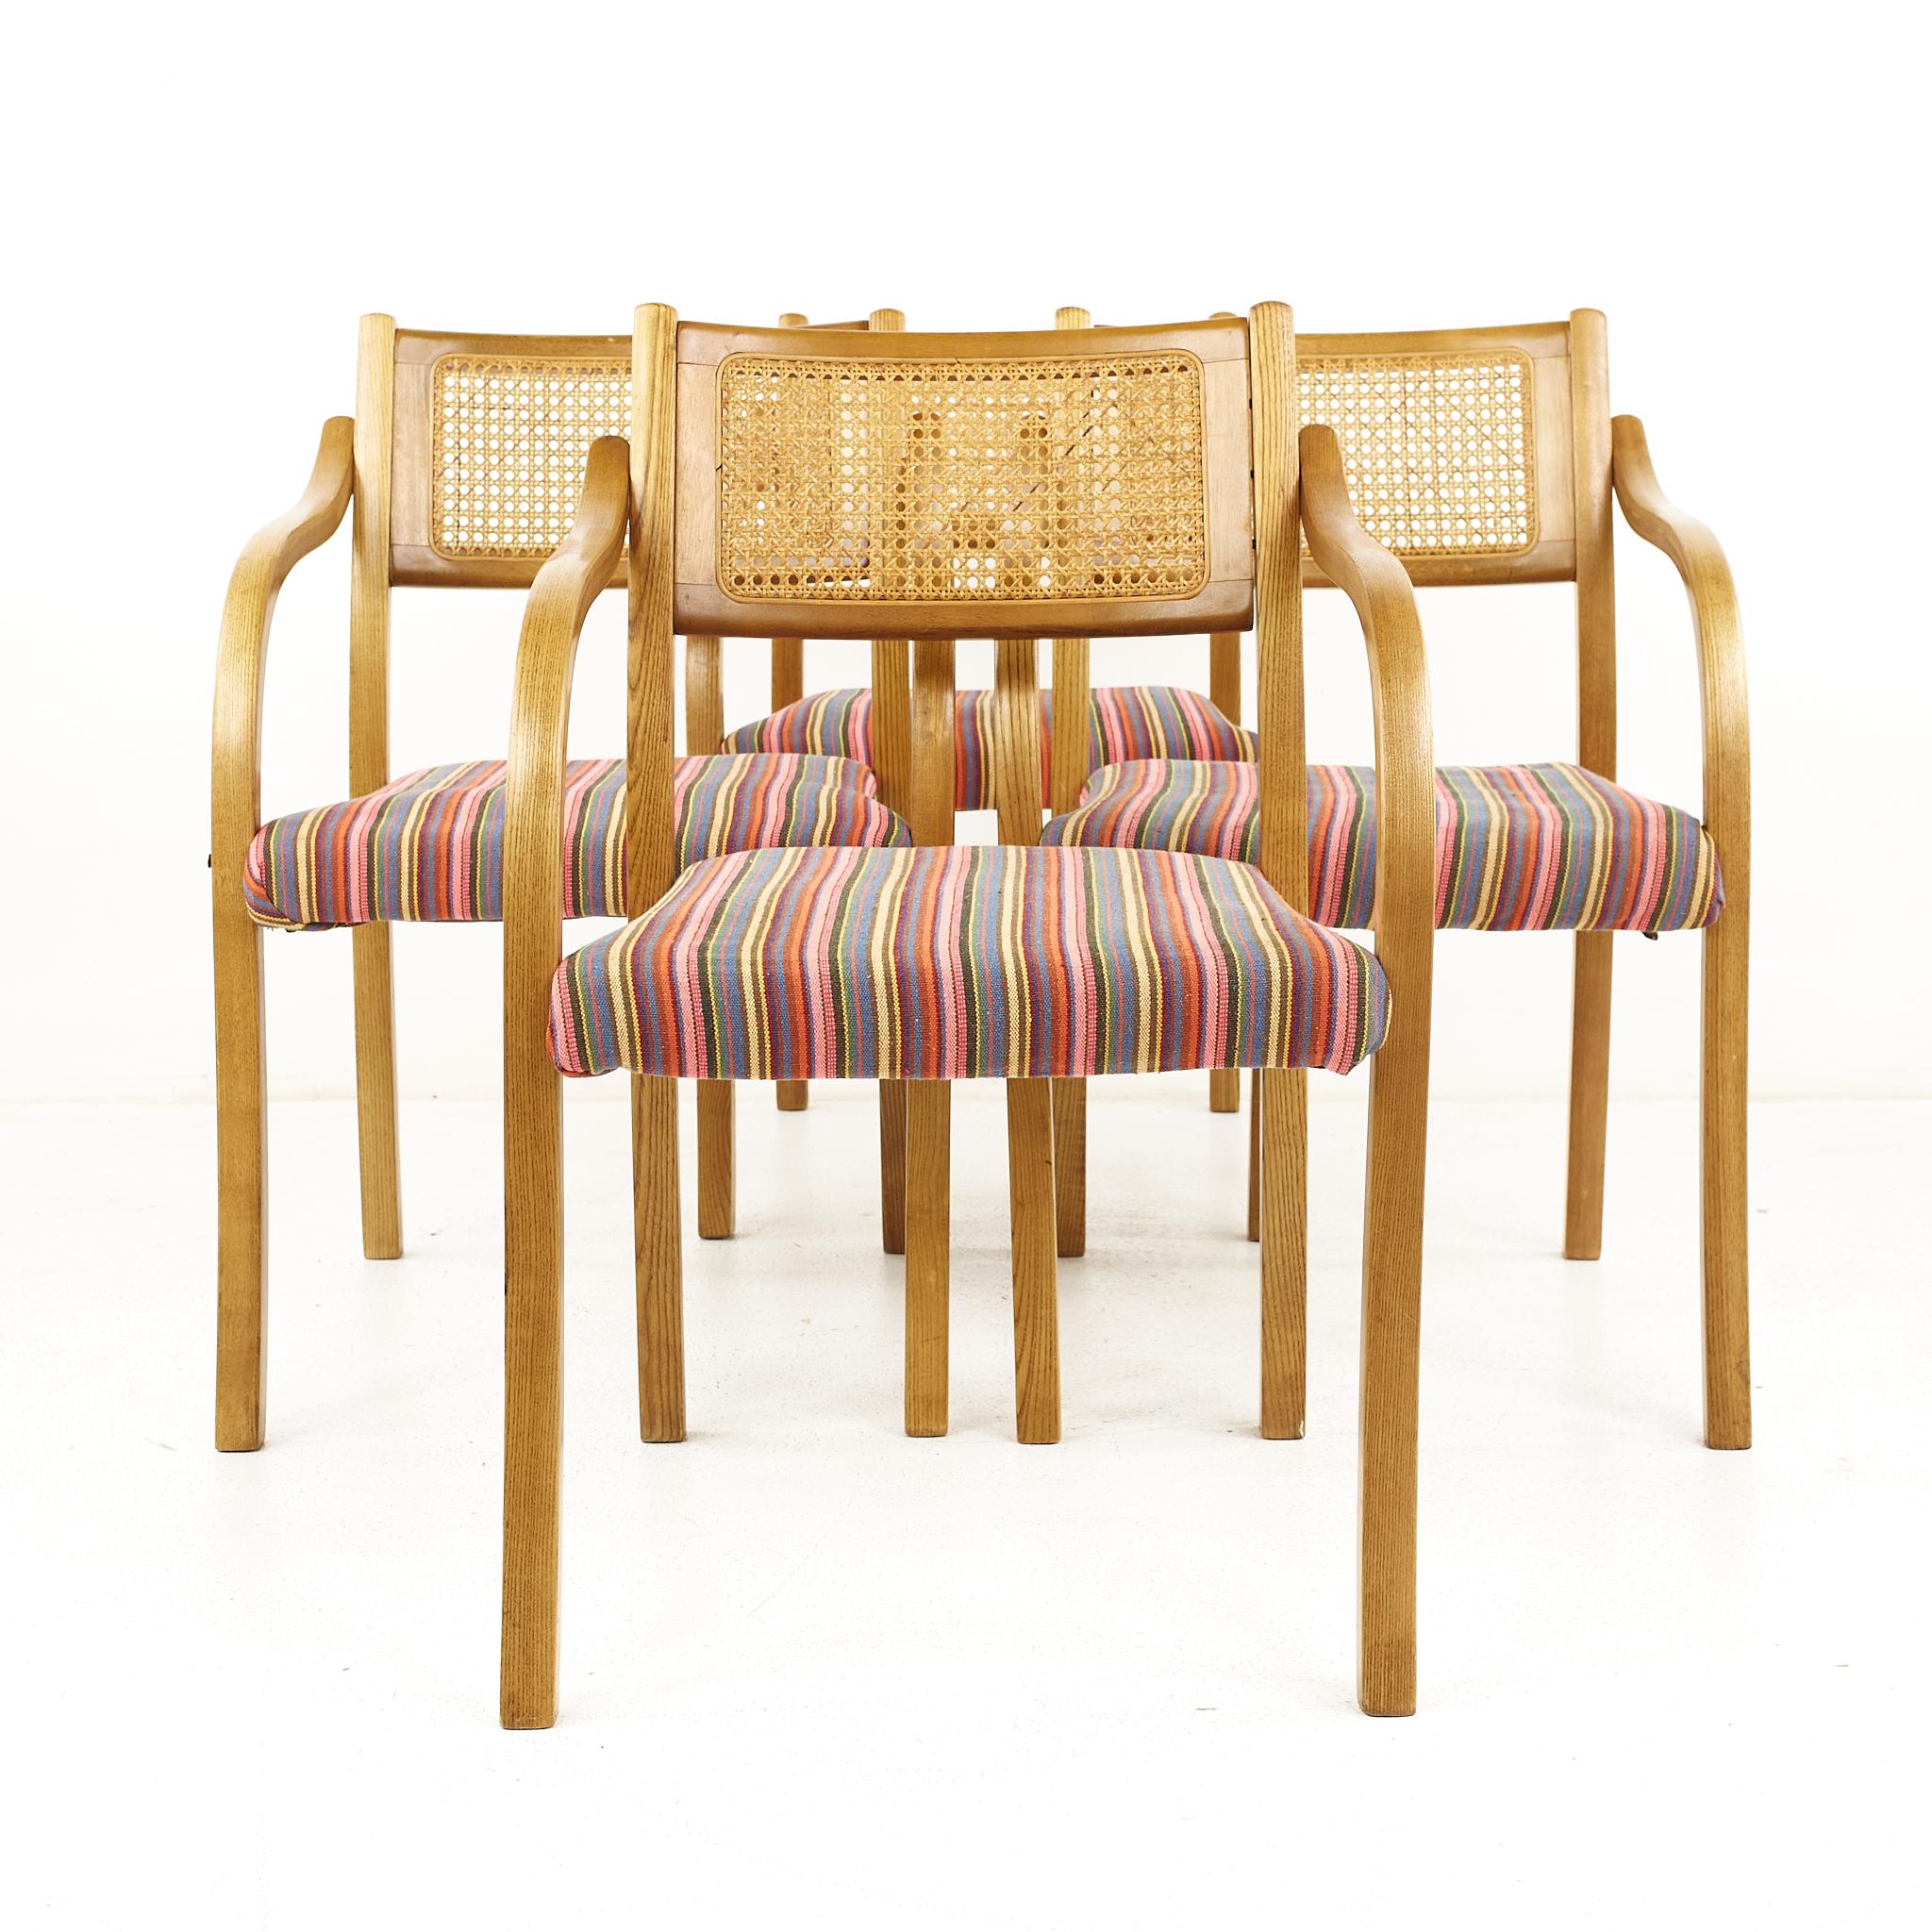 Thonet style mid century rattan and bentwood arm chairs - Set of 4 

Each chair measures: 21.5 wide x 18.5 deep x 32.25 high, with a seat height of 17.5 inches and arm height of 26 inches 

All pieces of furniture can be had in what we call